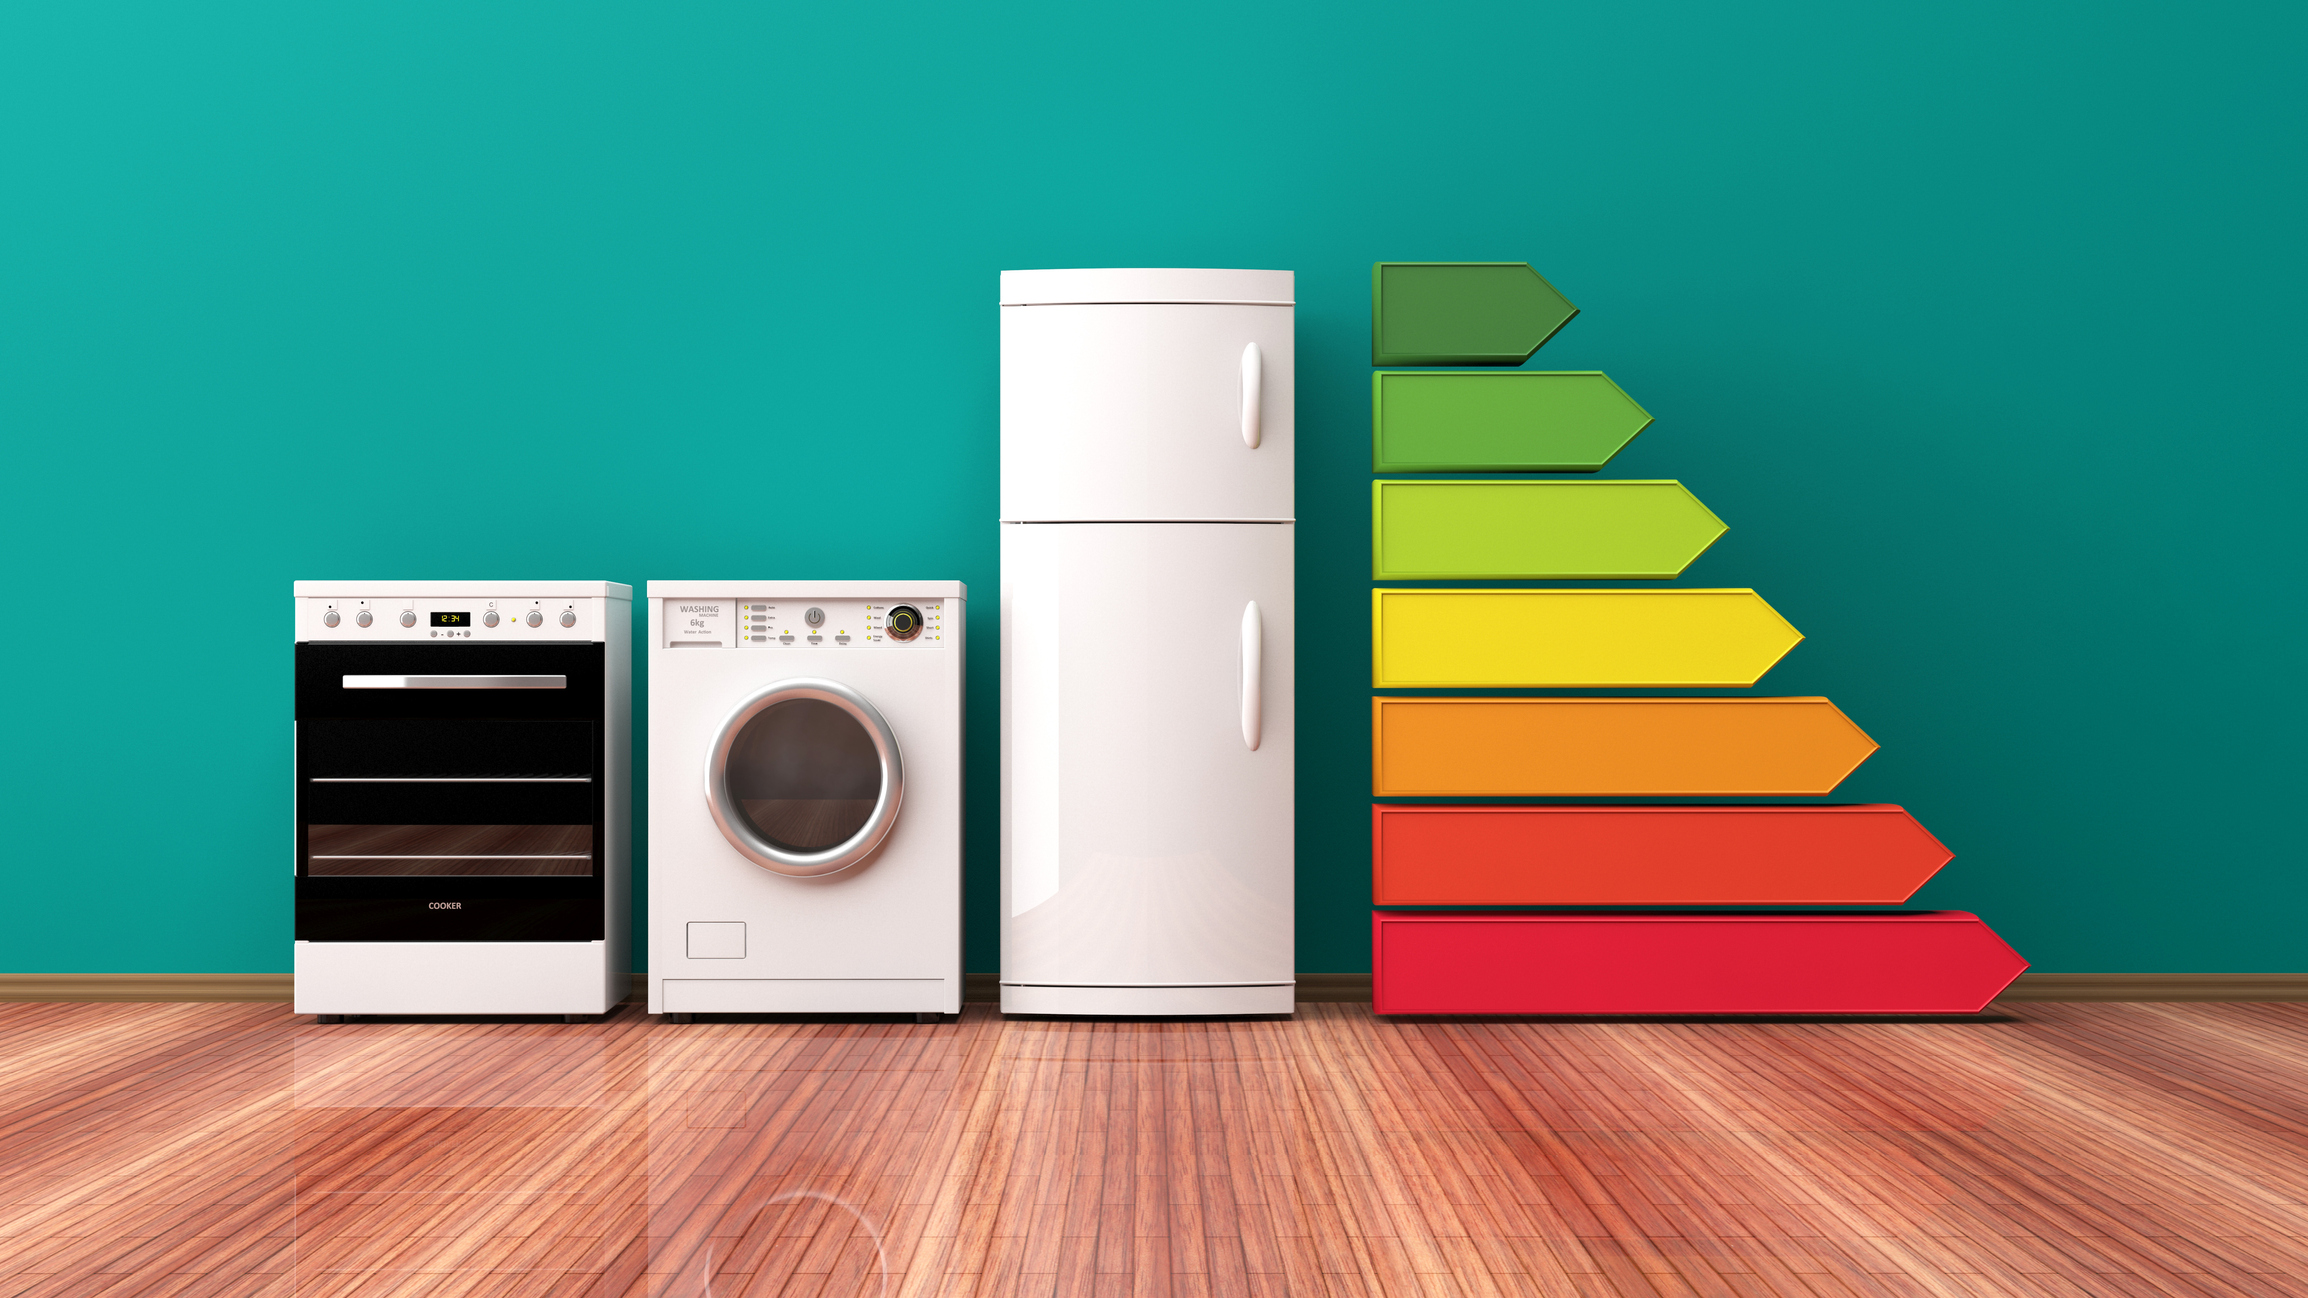 home-appliances-and-energy-efficiency-rating-3d-illustration